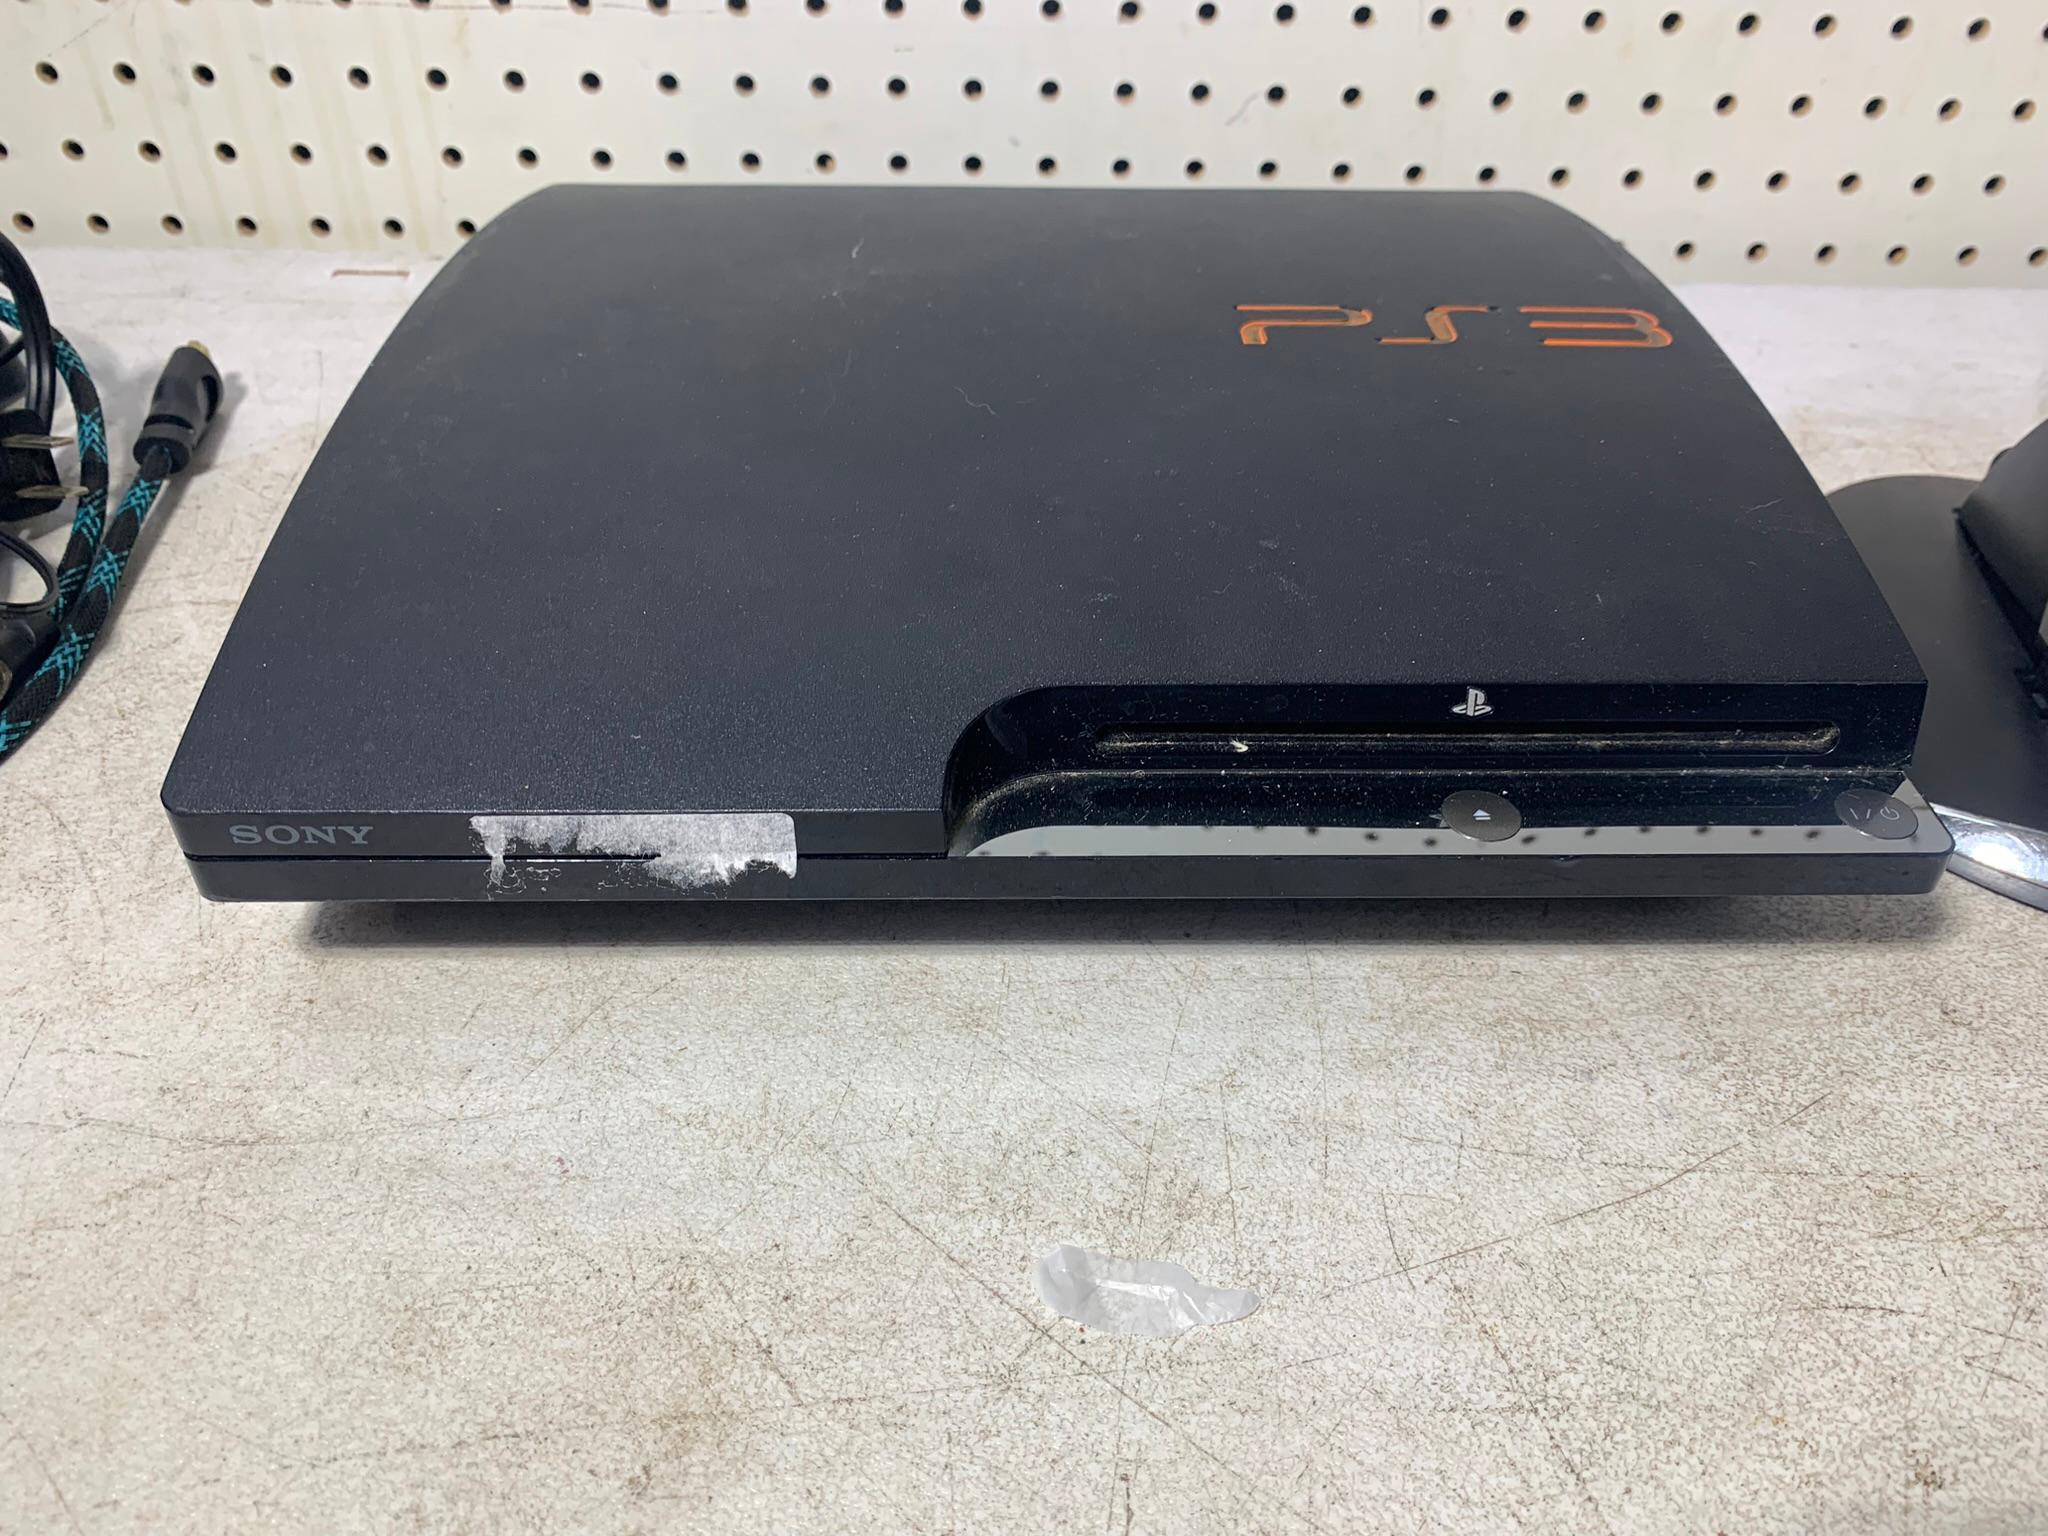 Sony PS3 150 GB Console with Controller and Cords